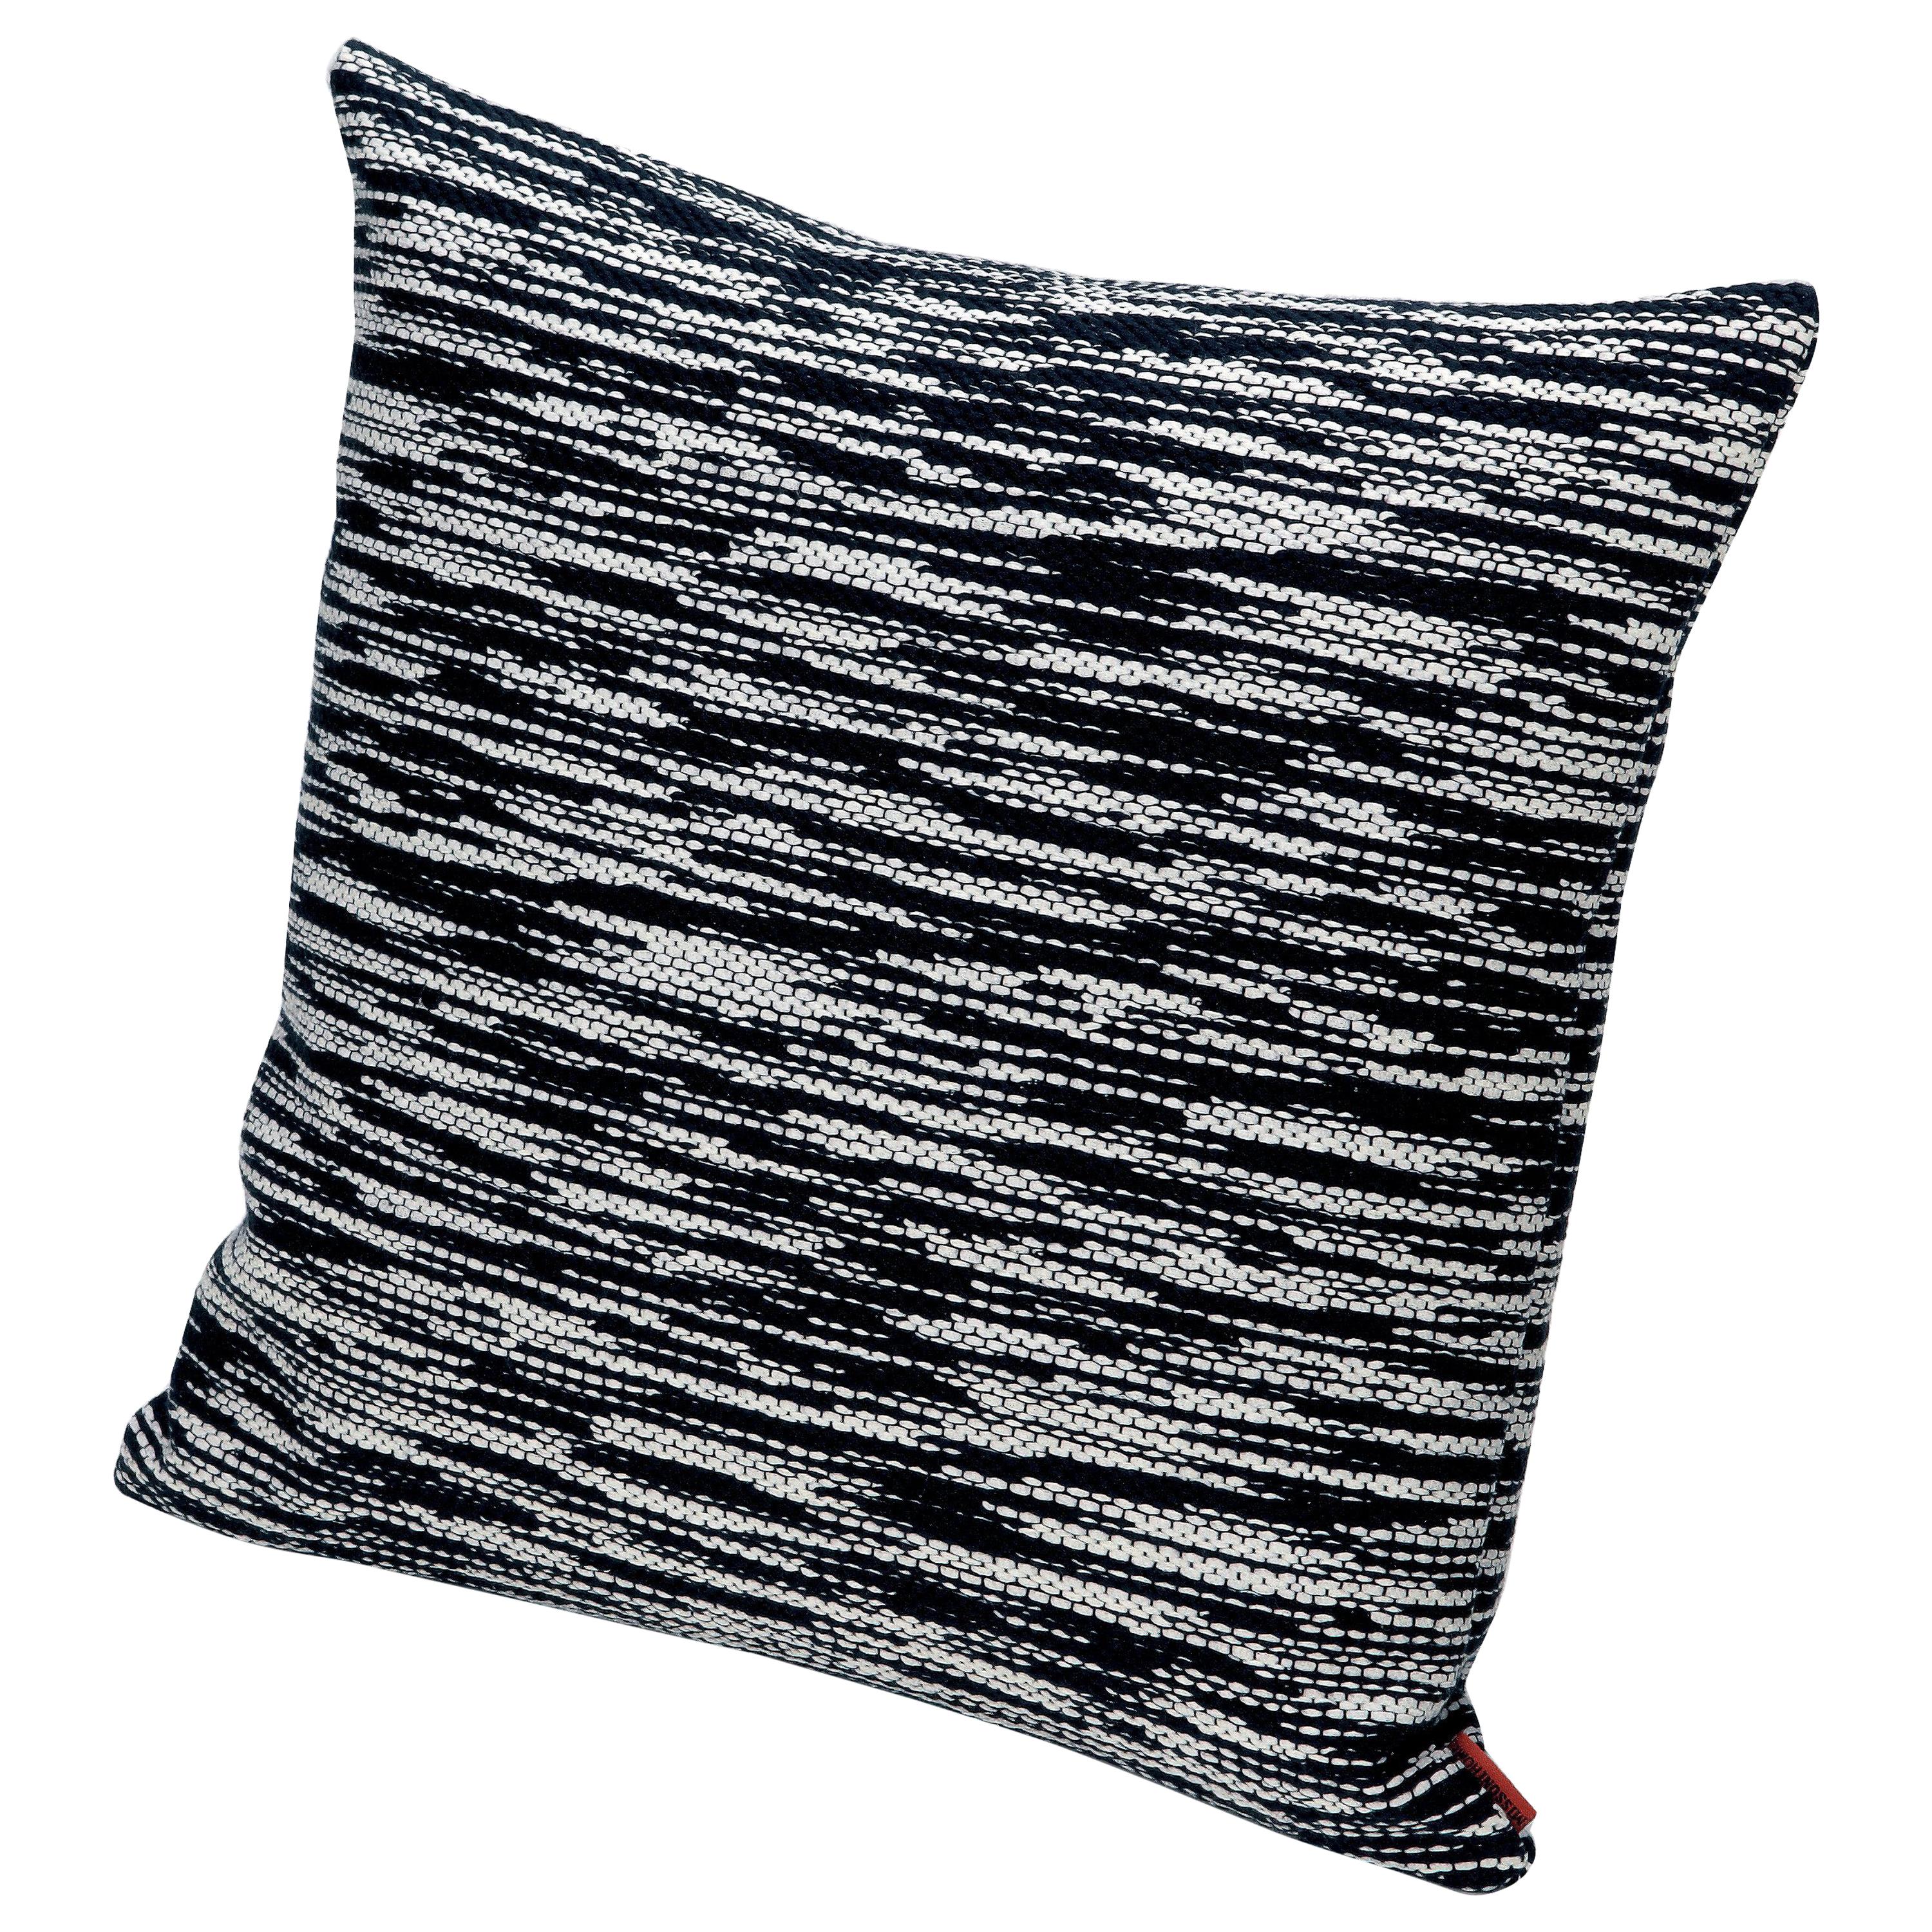 Missoni Home Zermatt Cushion with Black and White Flame Stitch Pattern For Sale